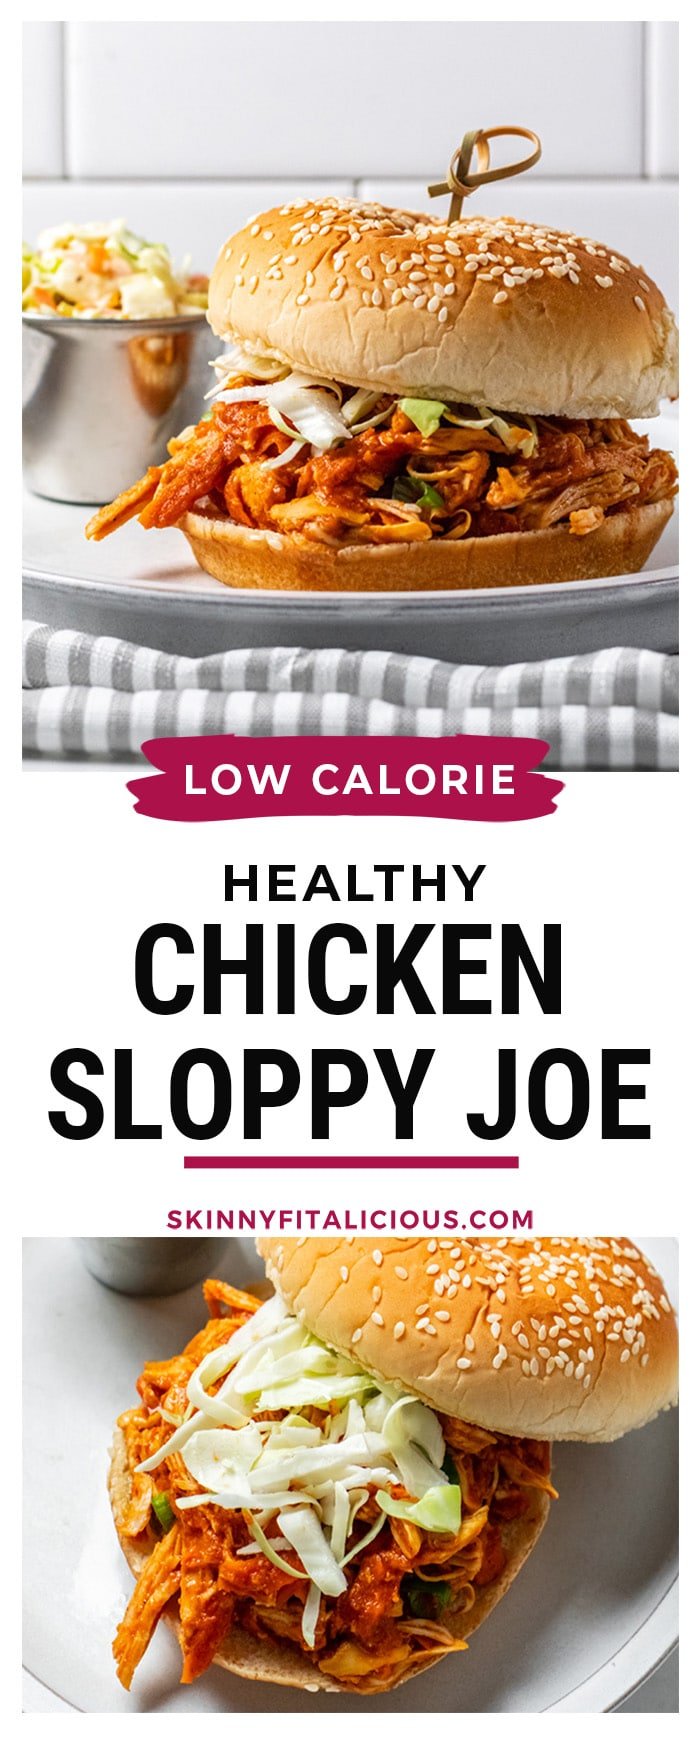 Healthy Shredded Chicken Sloppy Joes is a low calorie meal made easy in a slow cooker with a flavorful sauce. Clean ingredients, delicious taste and family approved! 